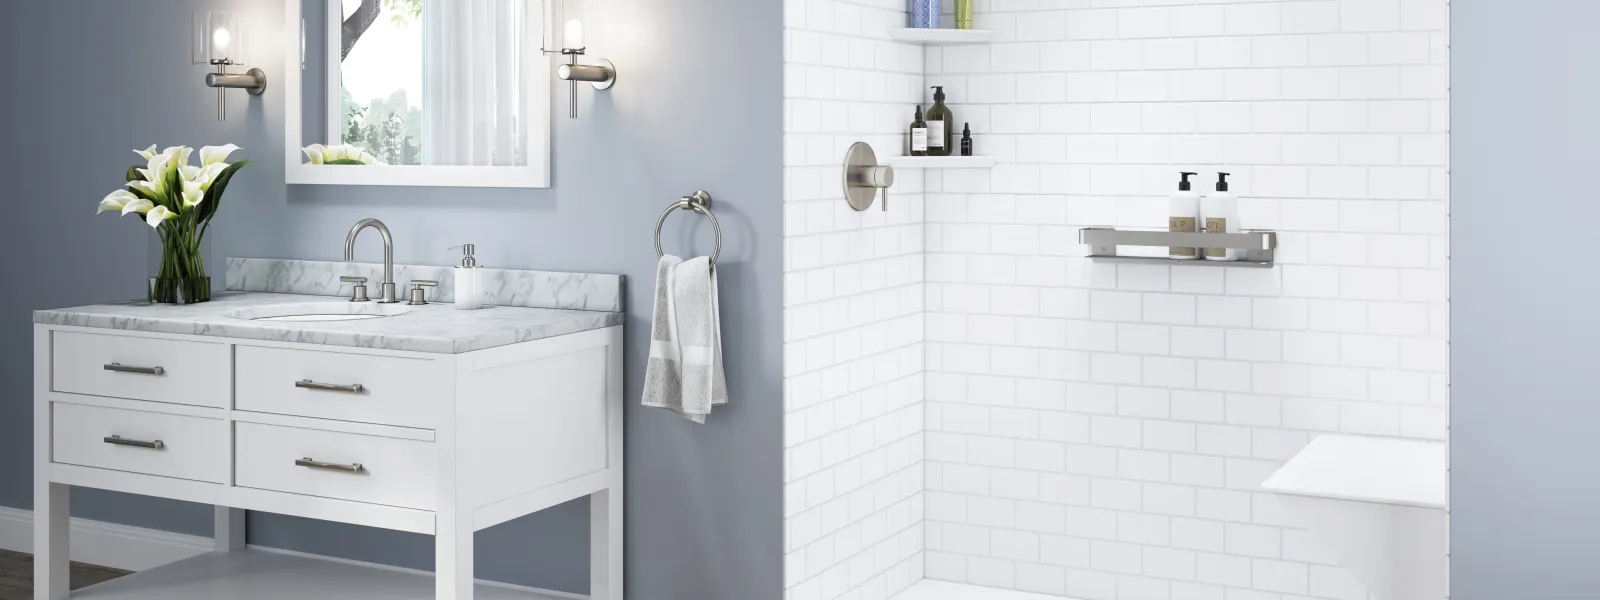 Selling Your Home with the Help of your Bathroom